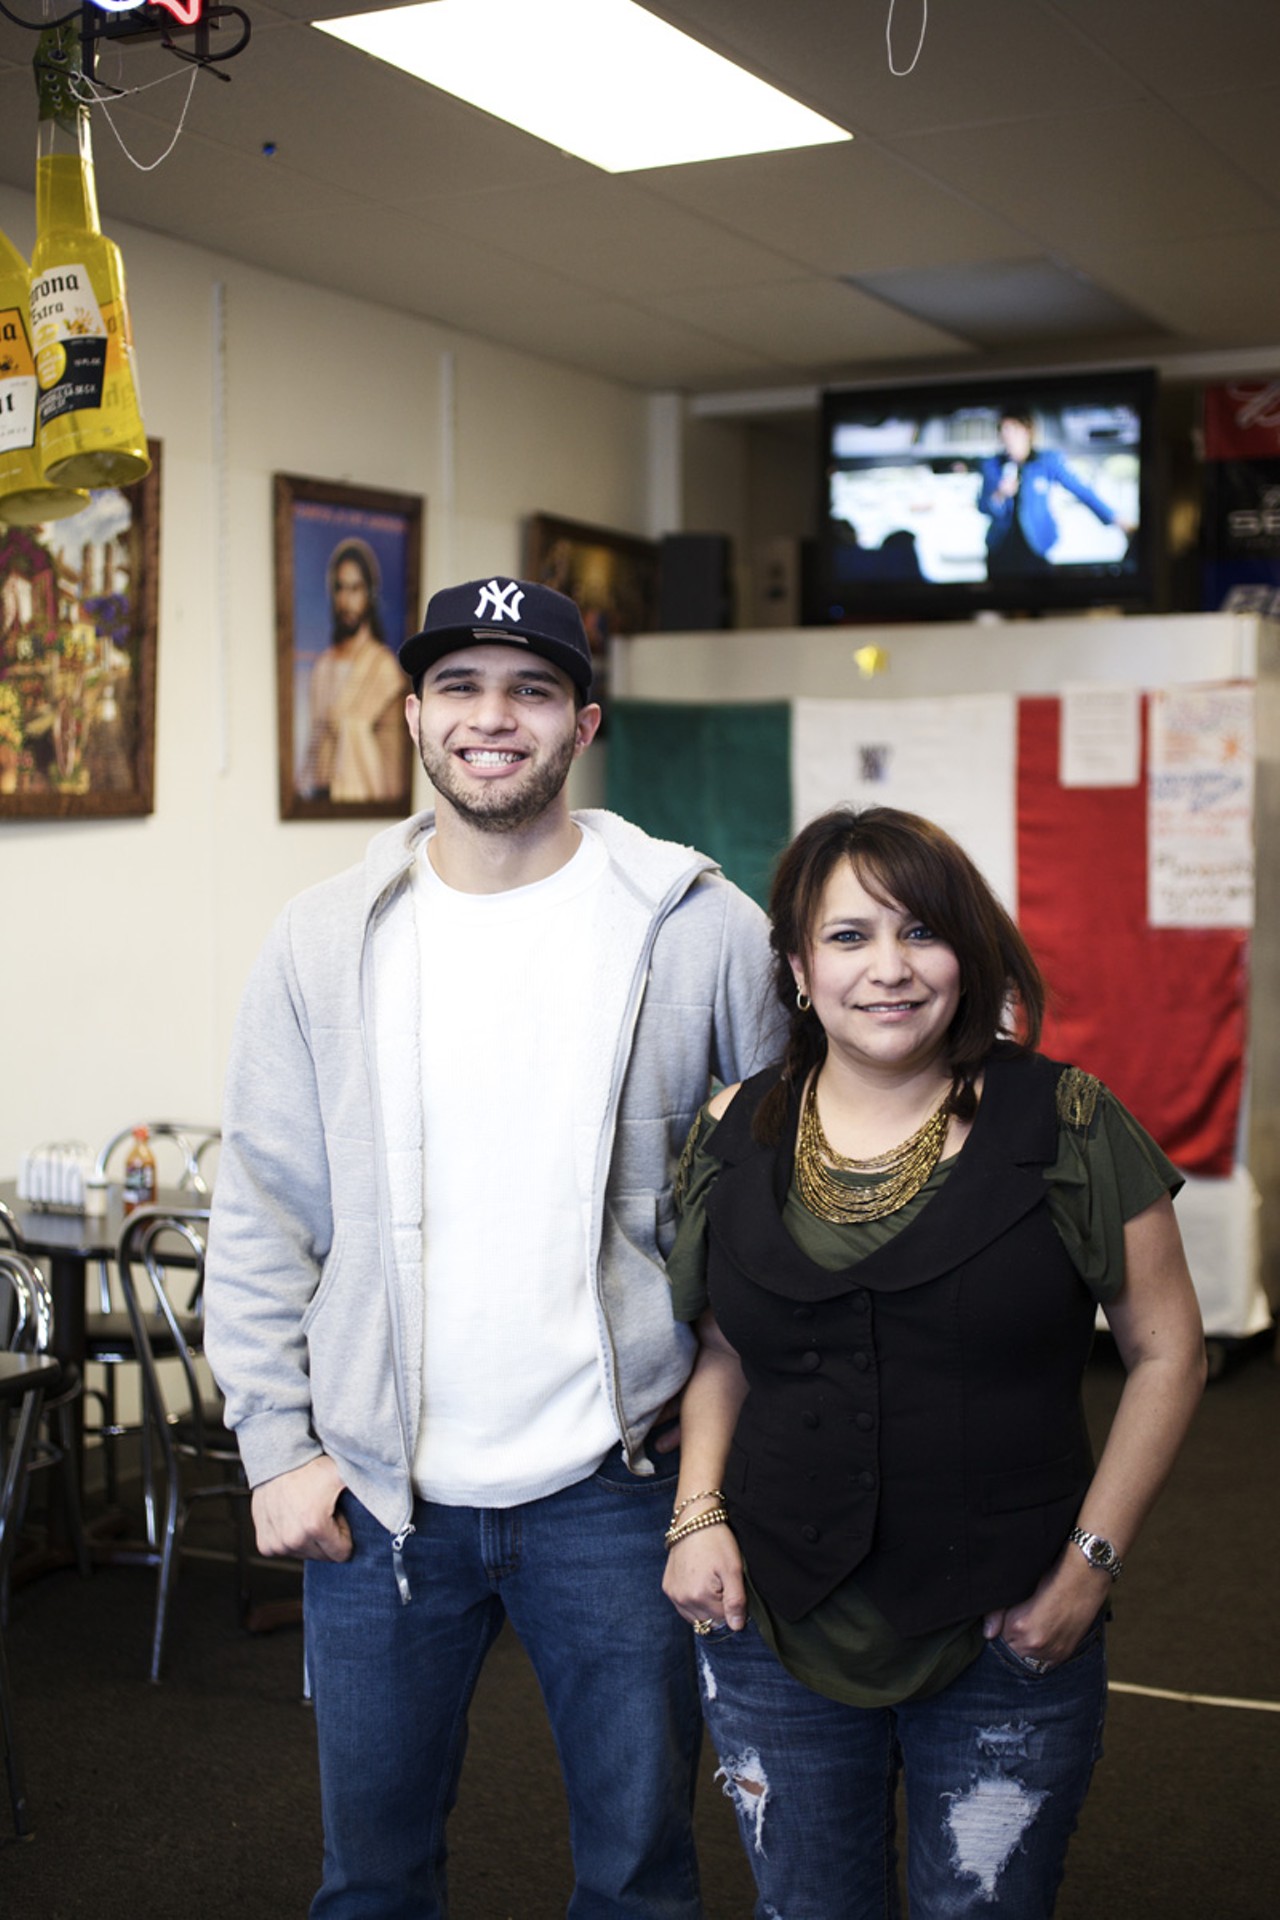 La Tejana is owned by the Garcia family. Pictured here are Brenda Garcia and her son, Tyler Garcia.